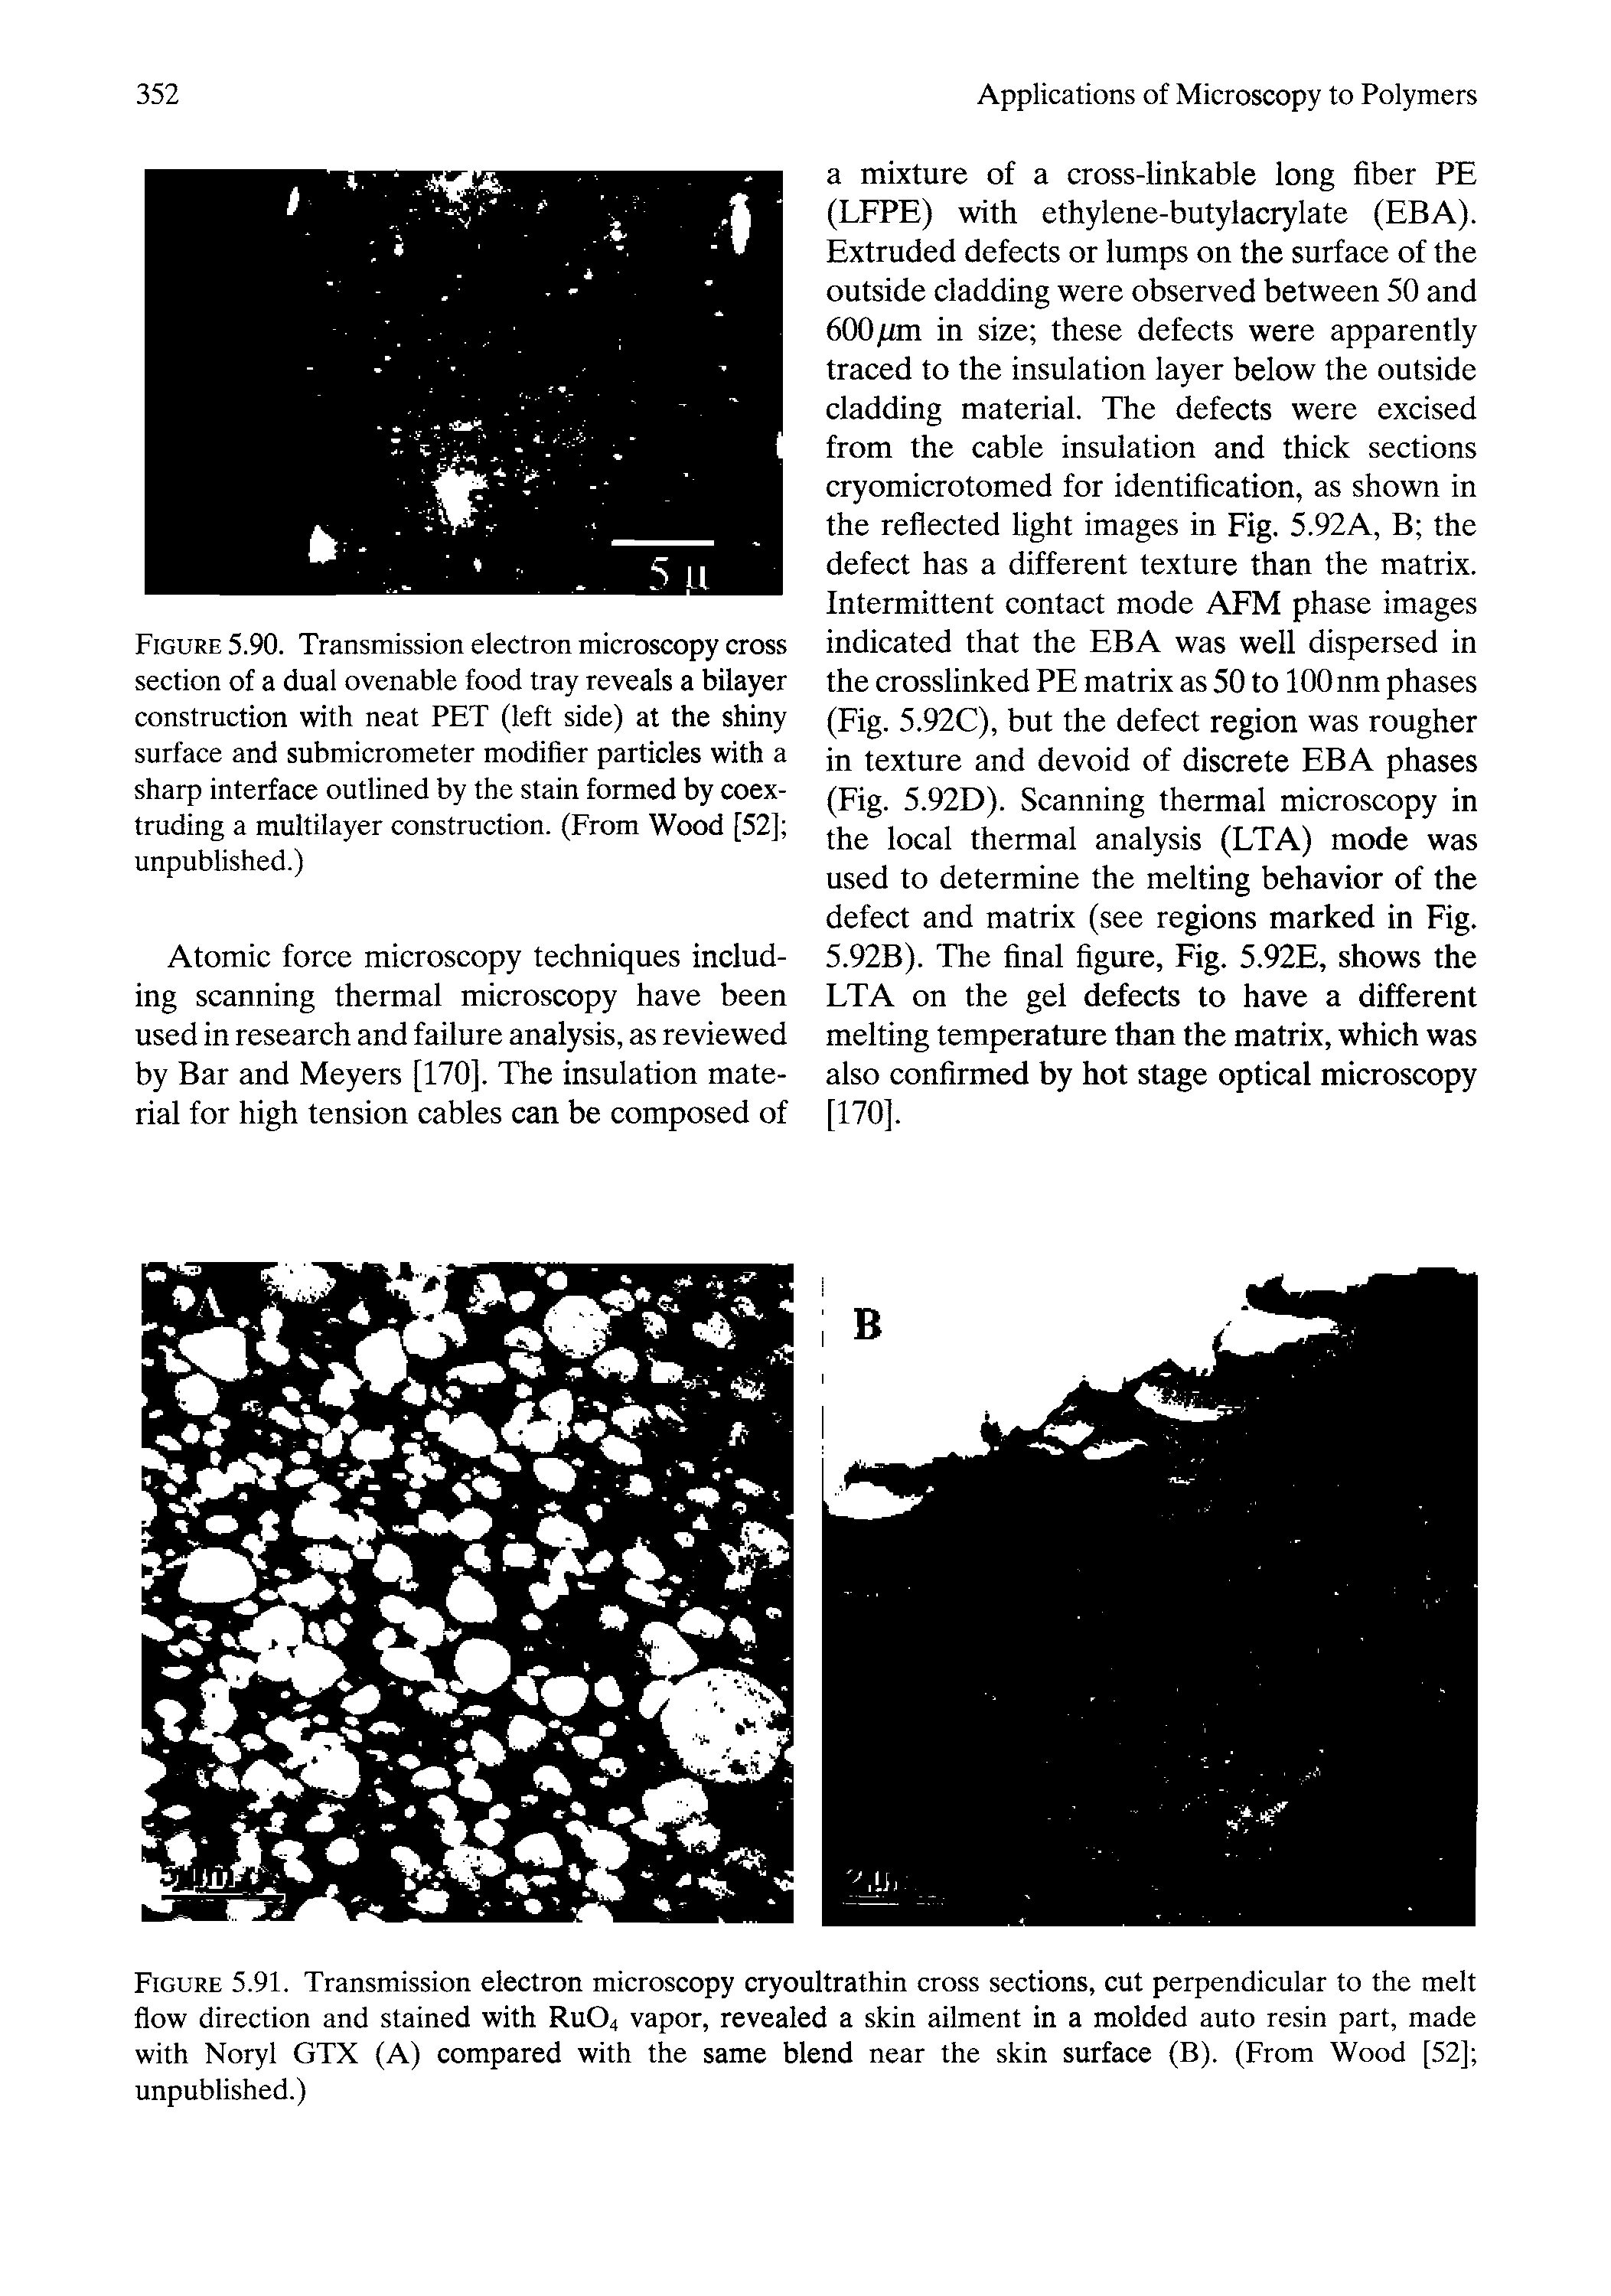 Figure 5.91. Transmission electron microscopy cryoultrathin cross sections, cut perpendicular to the melt flow direction and stained with RUO4 vapor, revealed a skin ailment in a molded auto resin part, made with Noryl GTX (A) compared with the same blend near the skin surface (B). (From Wood [52] unpublished.)...